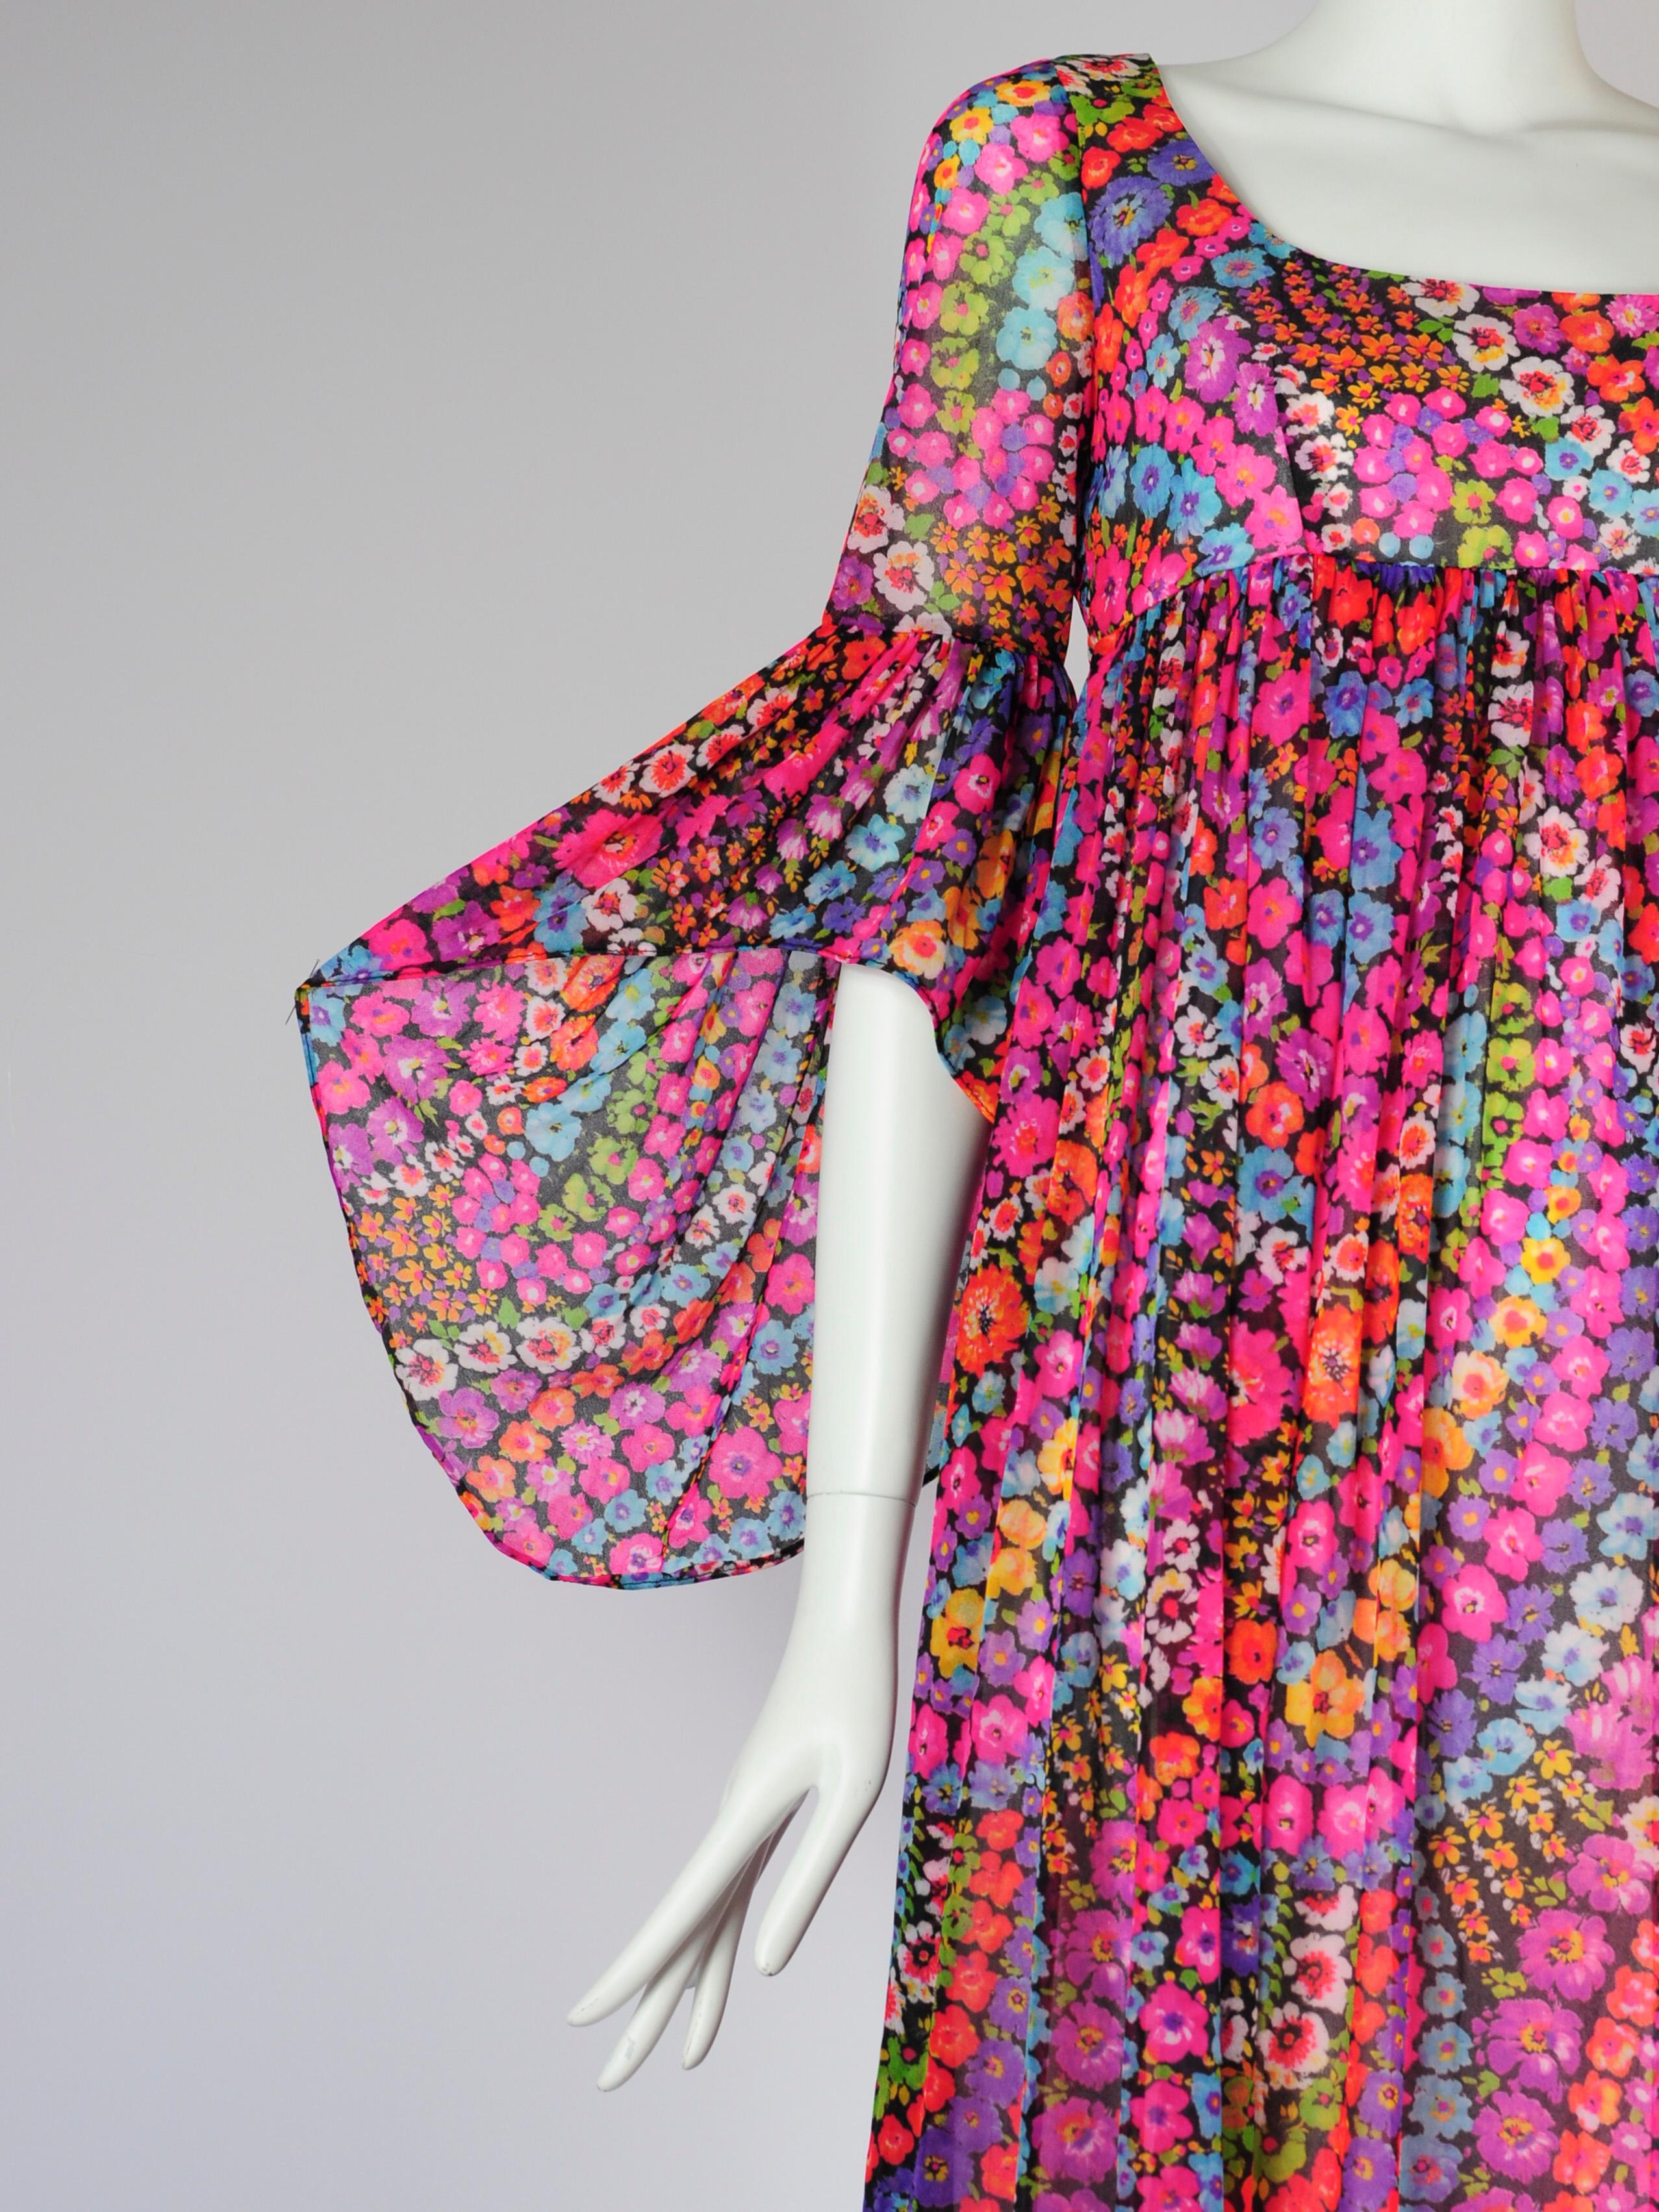 60s psychedelic dress